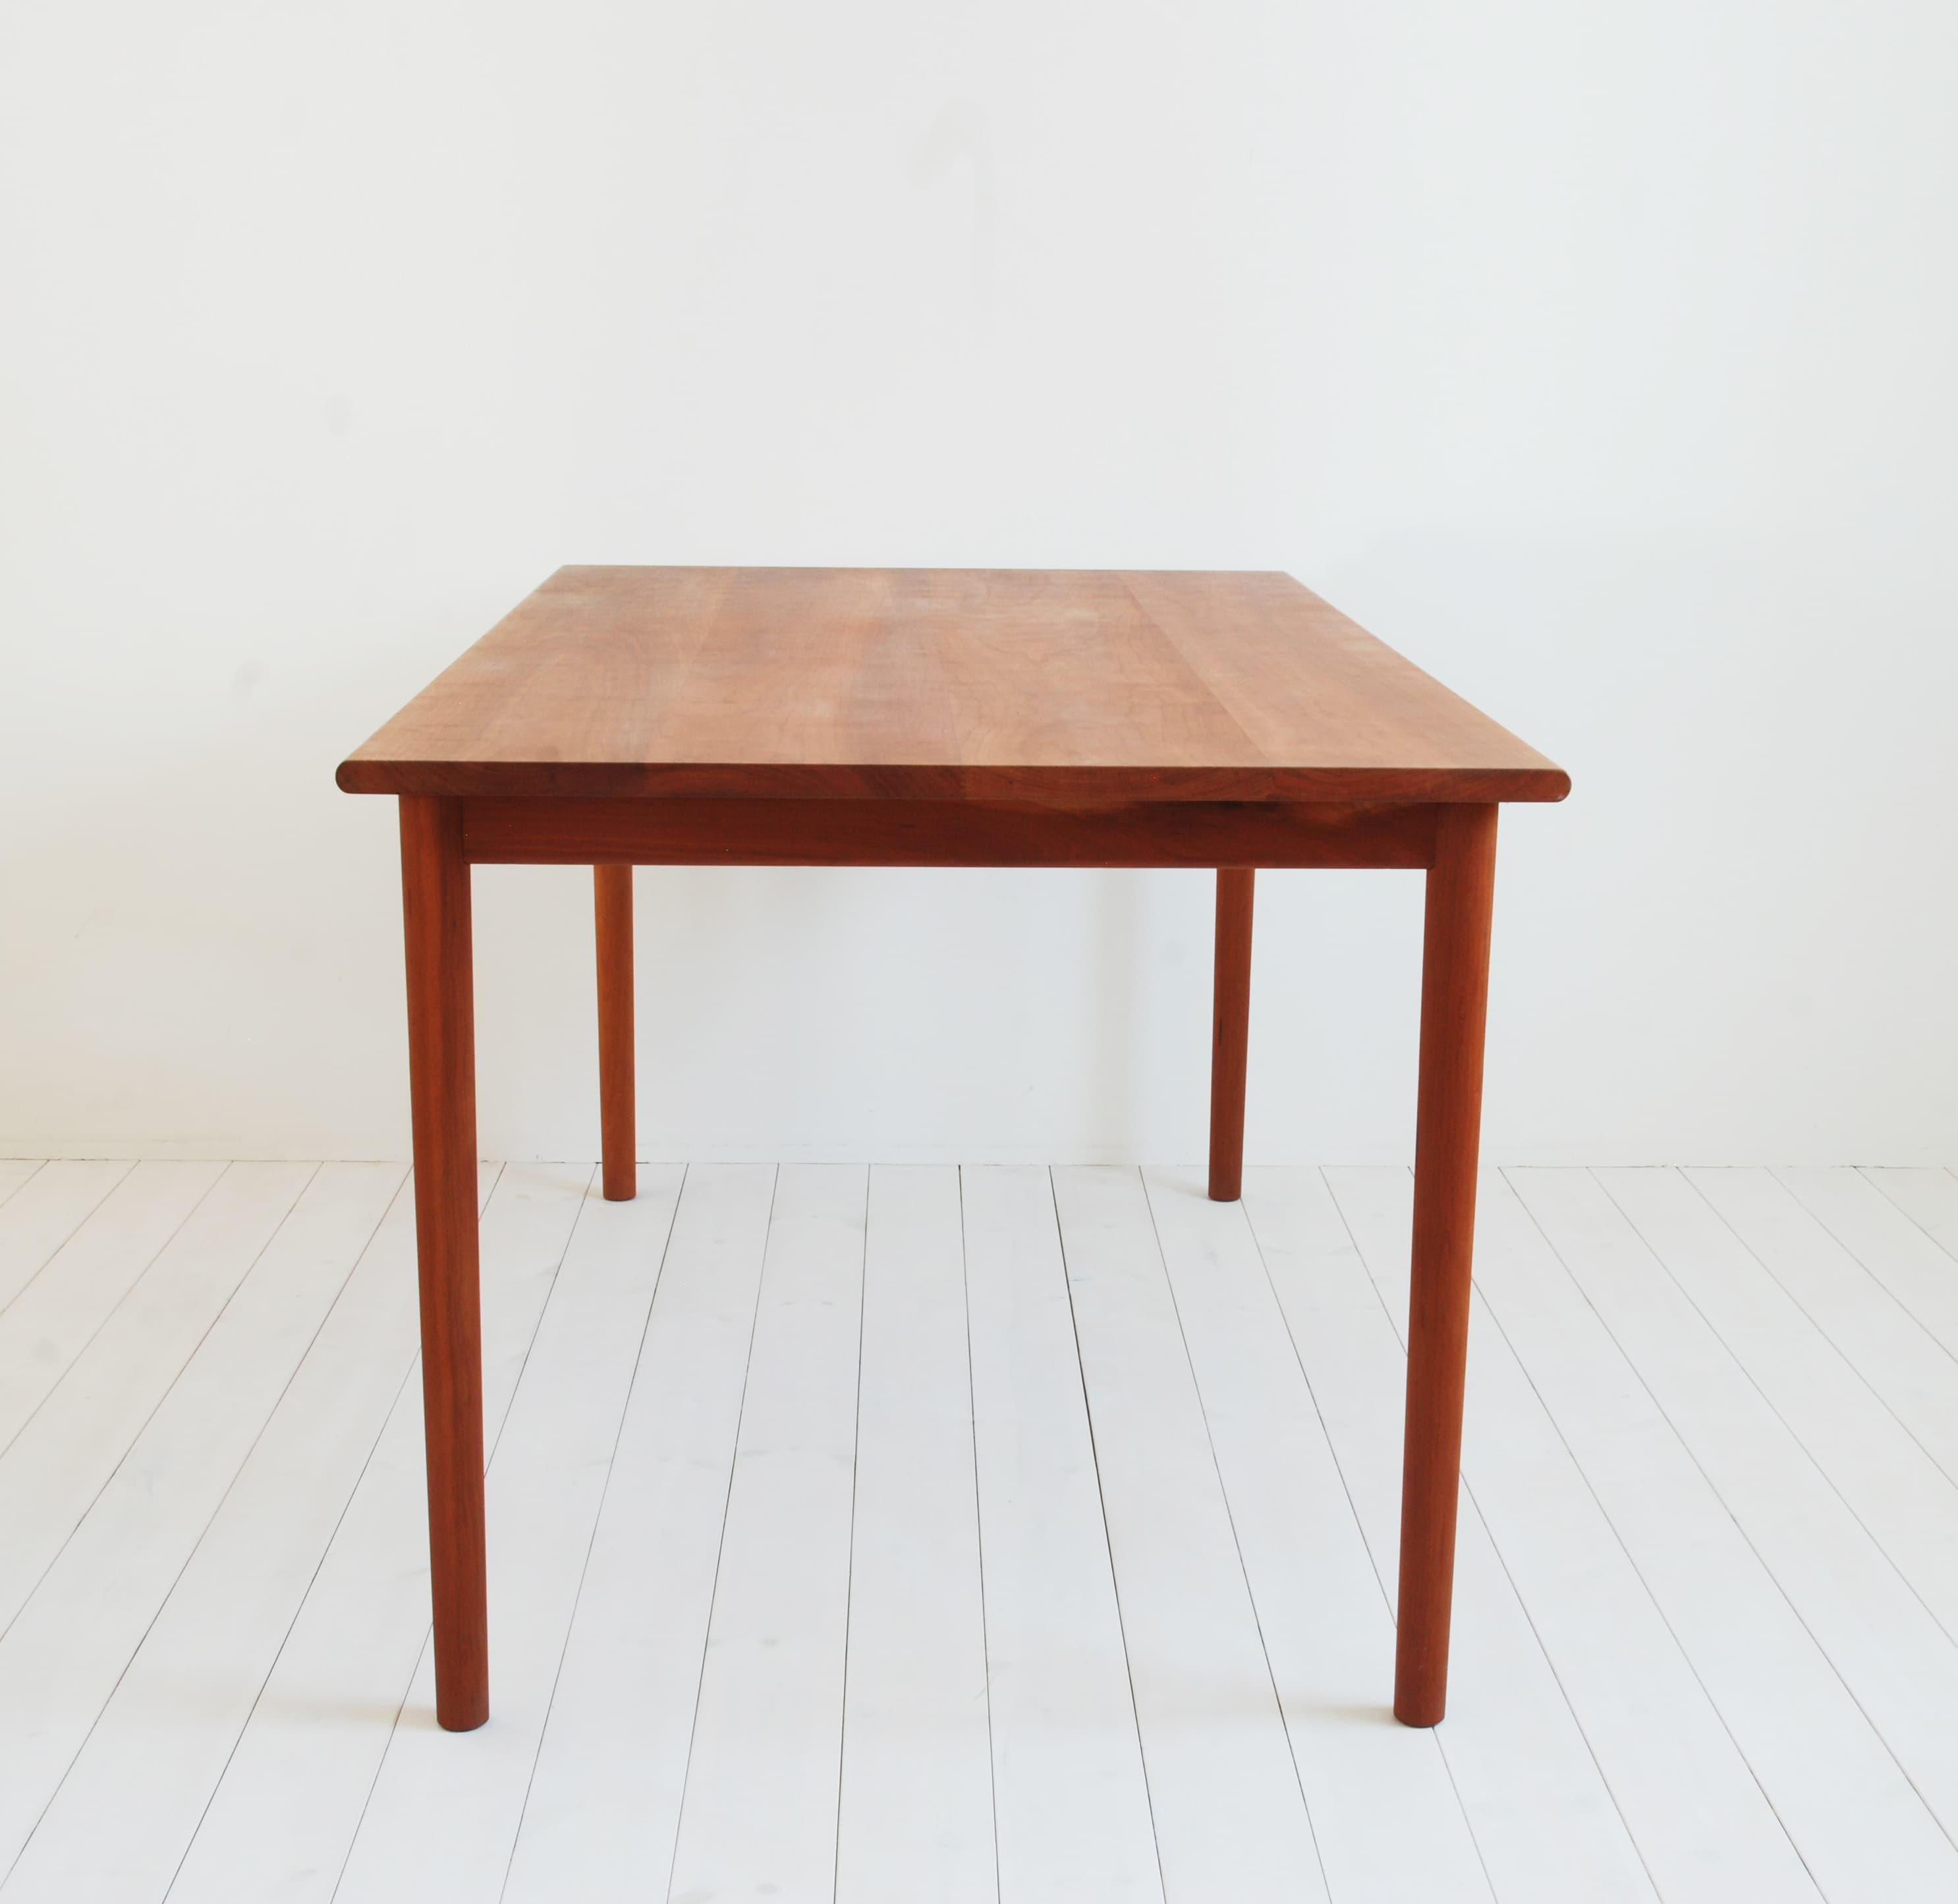 MM_table_03